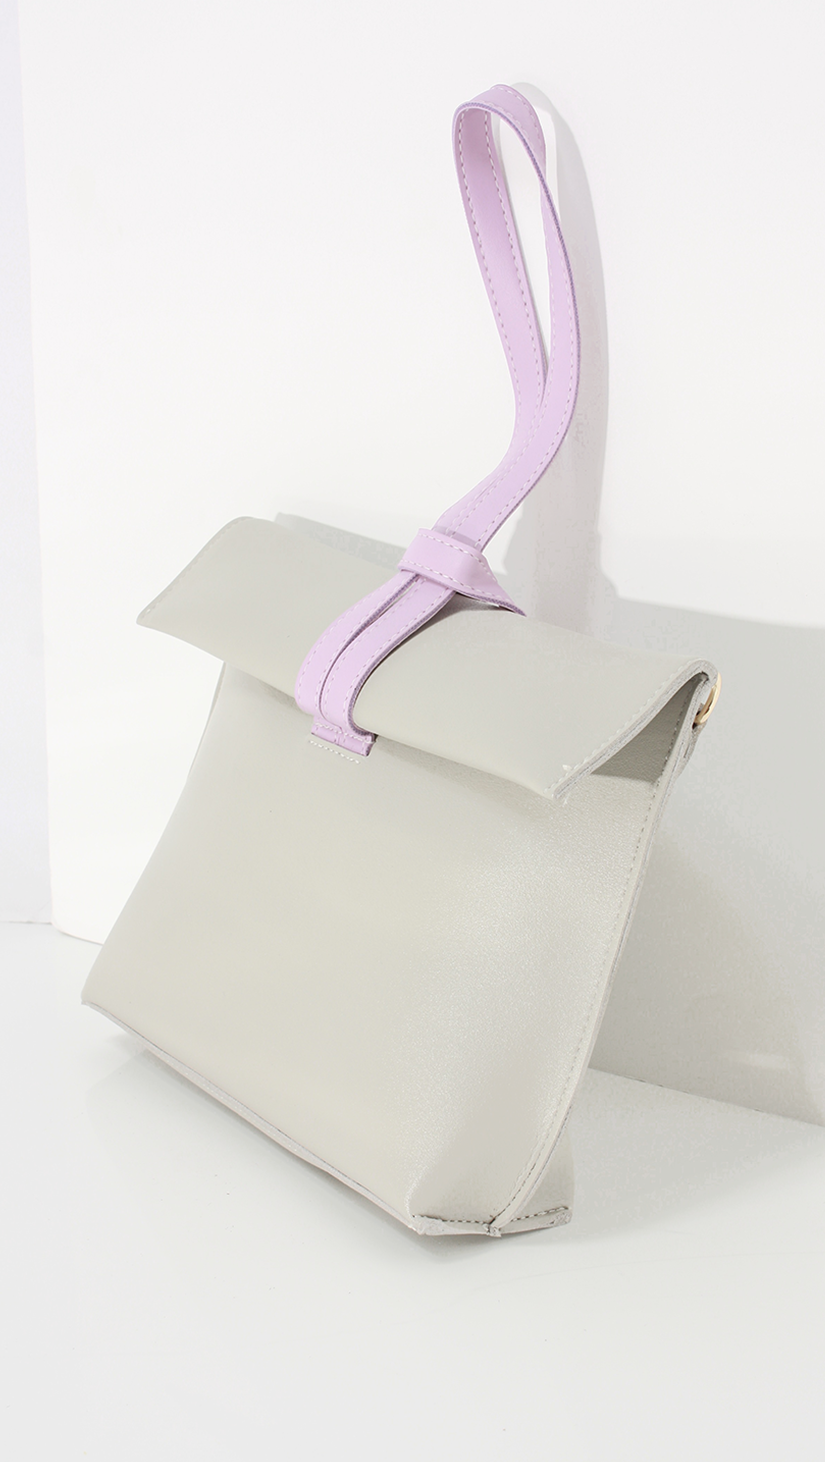 Melgar Cluth, a lightweight smooth pu leather with minimal styling in Grey